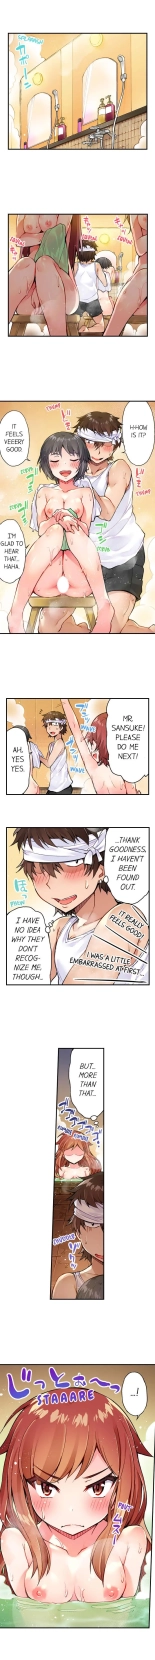 Traditional Job of Washing Girls' Body Ch. 1-171 : page 120